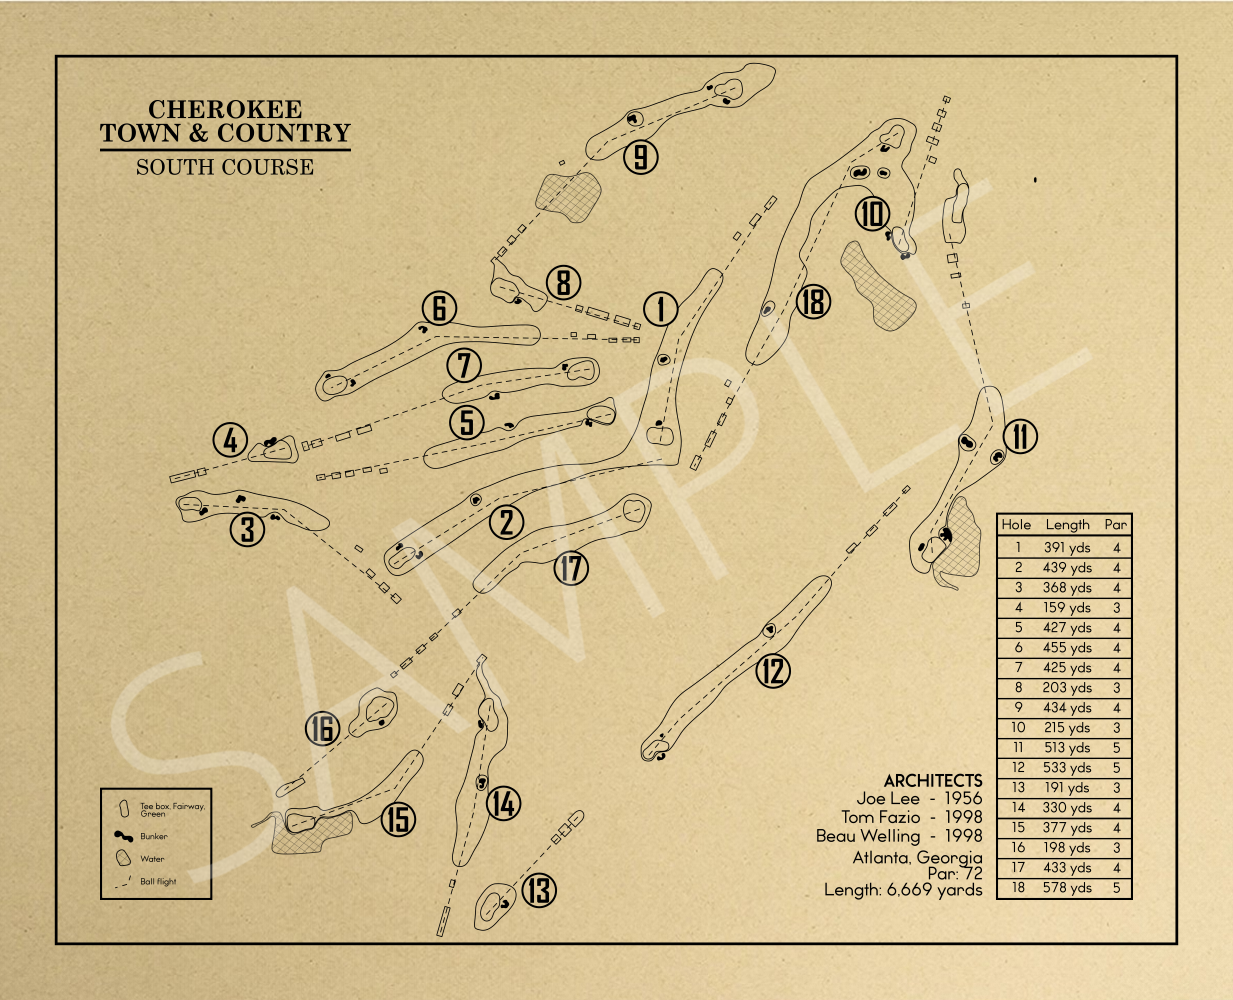 Cherokee Town & Country Club South Course Outline (Print)